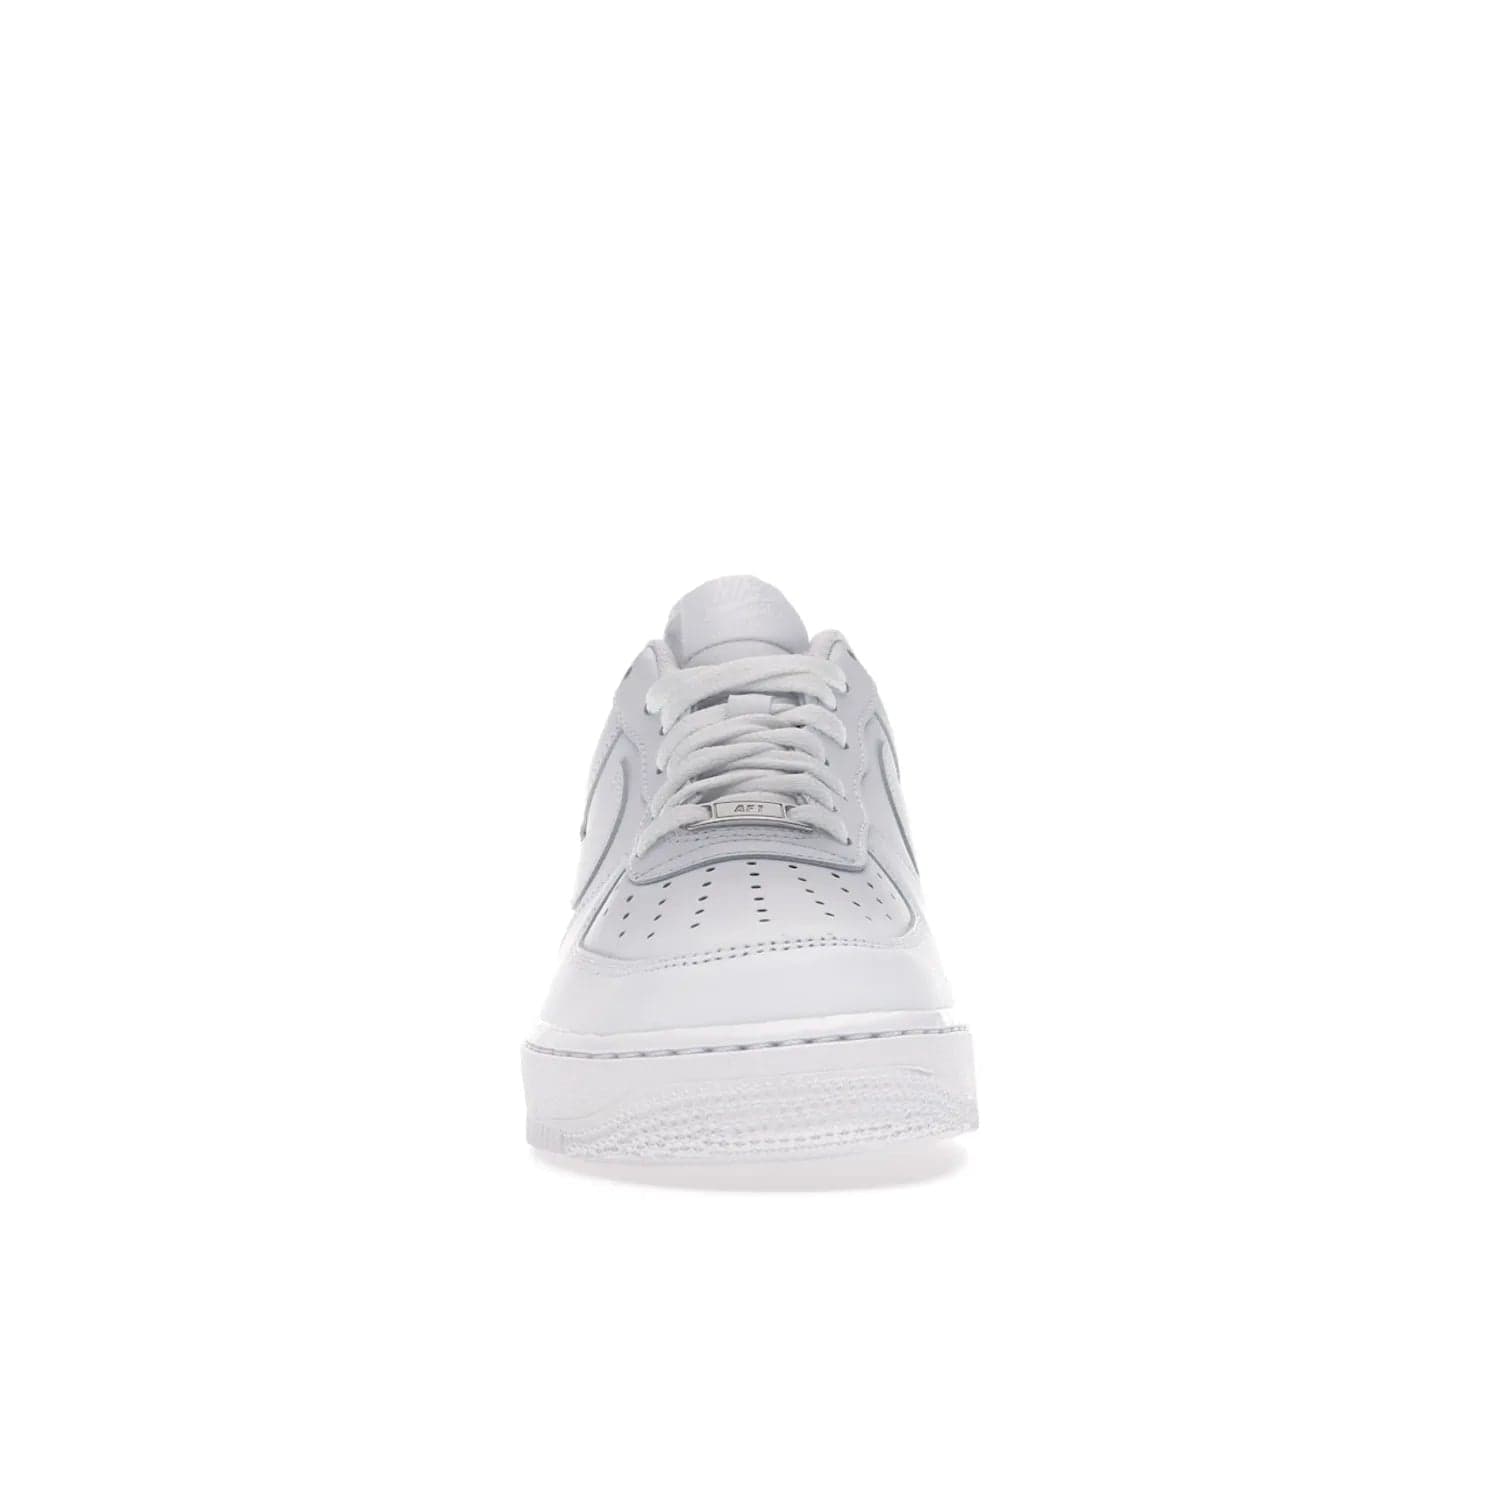 Nike Air Force 1 Low '07 White - Image 10 - Only at www.BallersClubKickz.com - ##
Iconic Swoosh overlays and crisp white sole make the classic Nike Air Force 1 Low White '07 an essential colorway. Classic for seasoned heads and new fans alike.